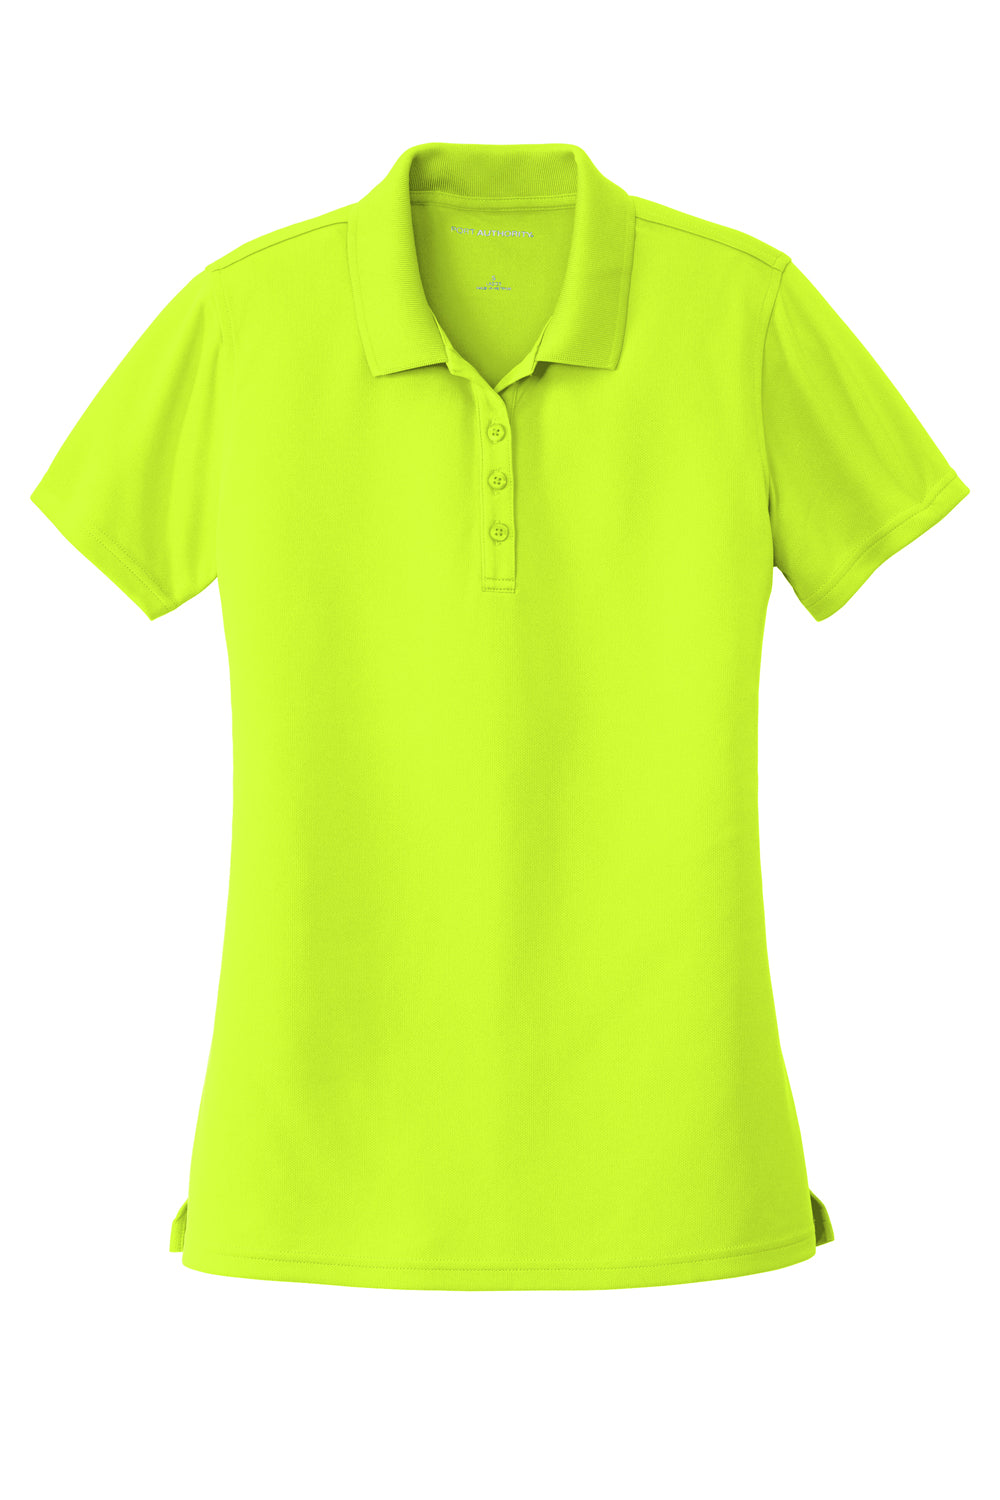 Port Authority Womens Dry Zone Moisture Wicking Short Sleeve Polo Shirt Safety Yellow Flat Front